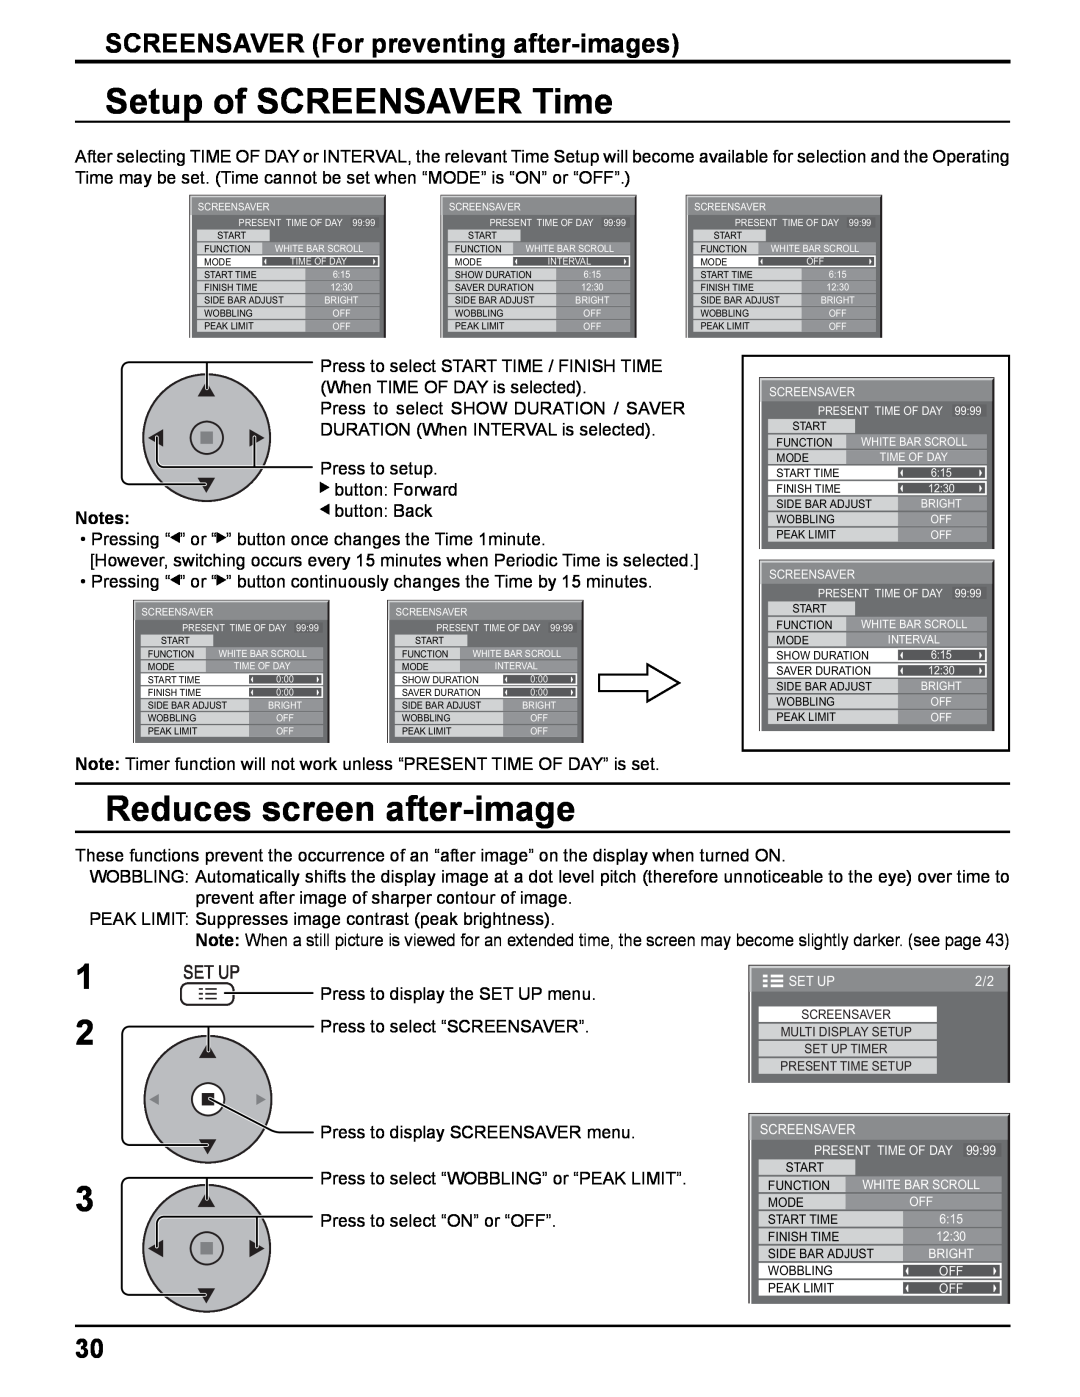 Panasonic TH-37PWD8UK manual Setup of SCREENSAVER Time, Reduces screen after-image, SCREENSAVER For preventing after-images 